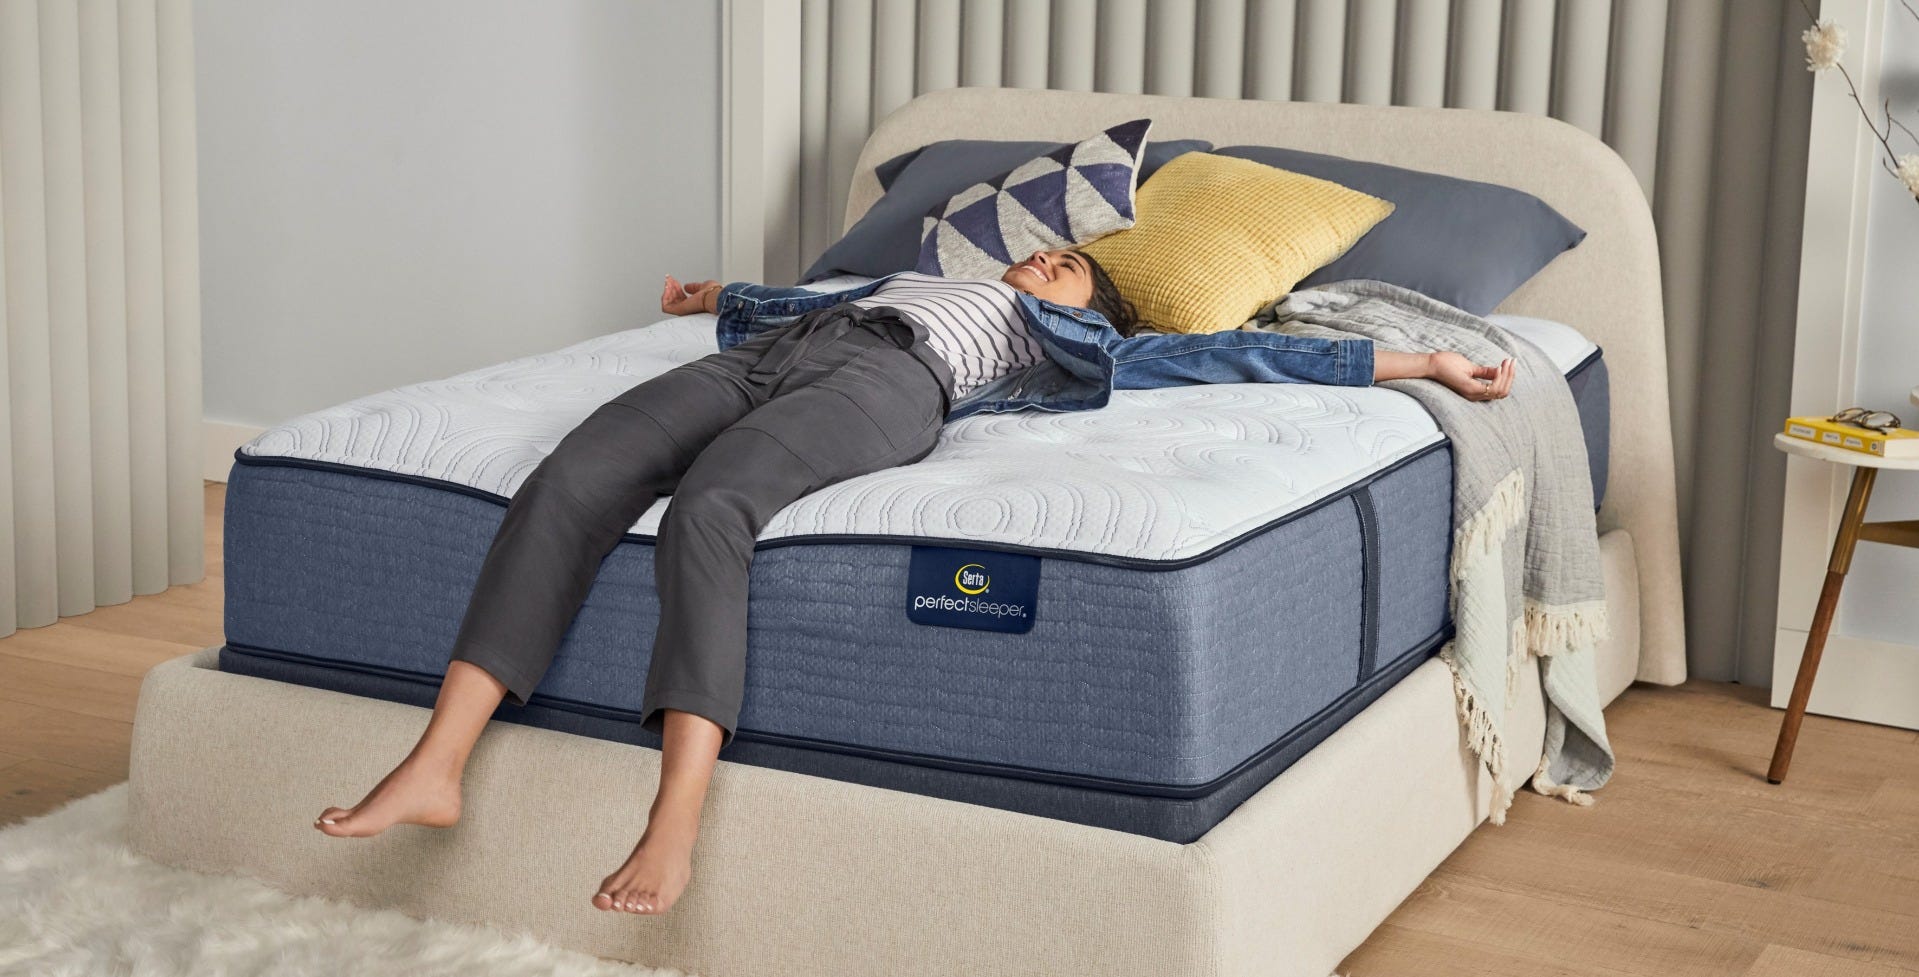 Pros And Cons Of Sealy And Serta Mattresses